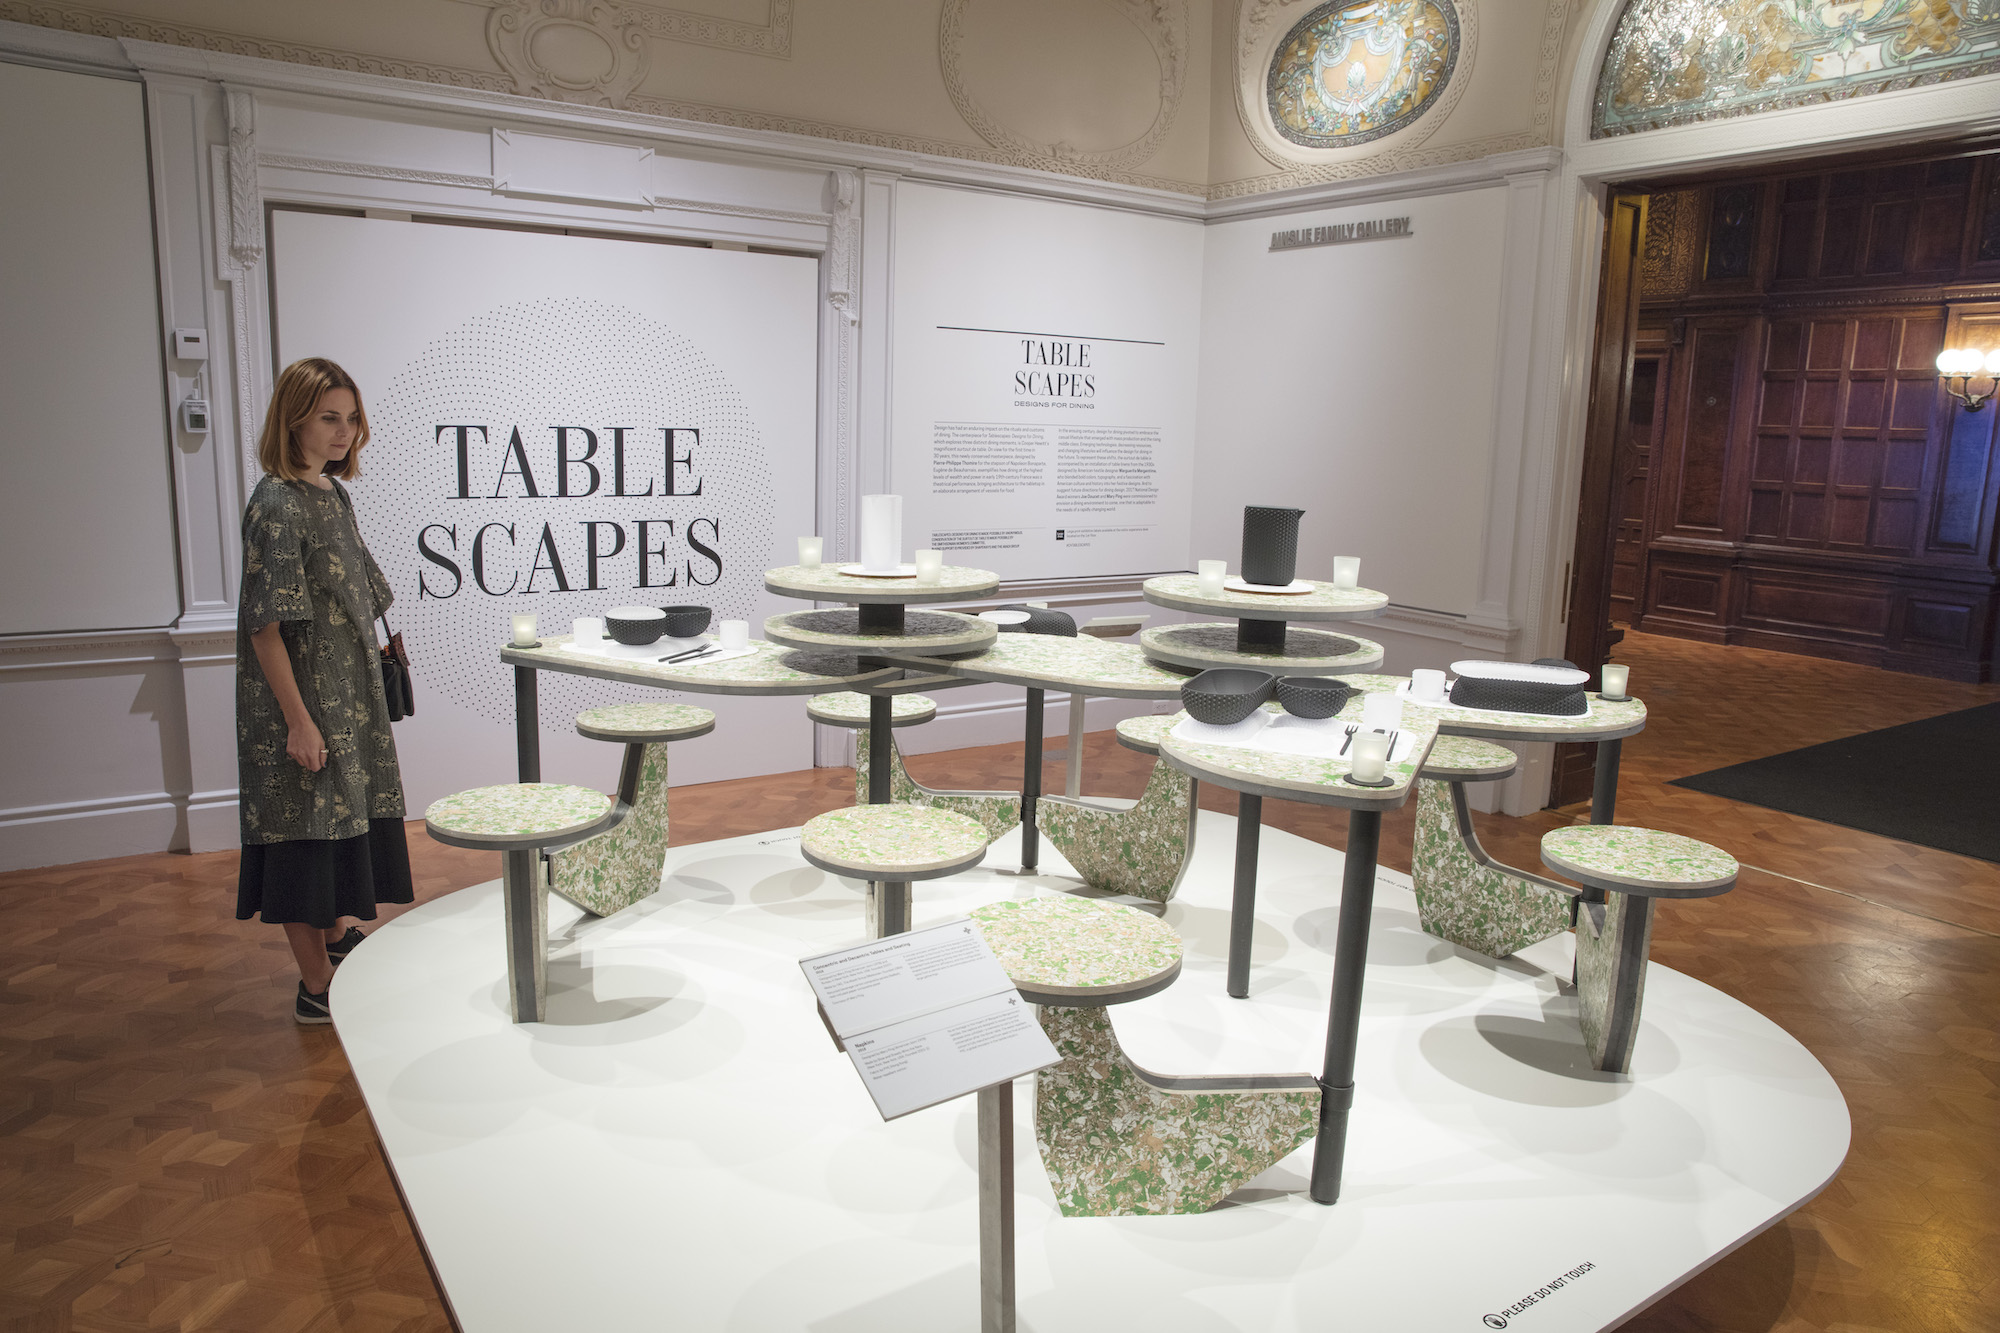 A woman examines a table design which features many connected seats and surfaces. The piece is within the Tablescapes: Designs for Dining exhibit